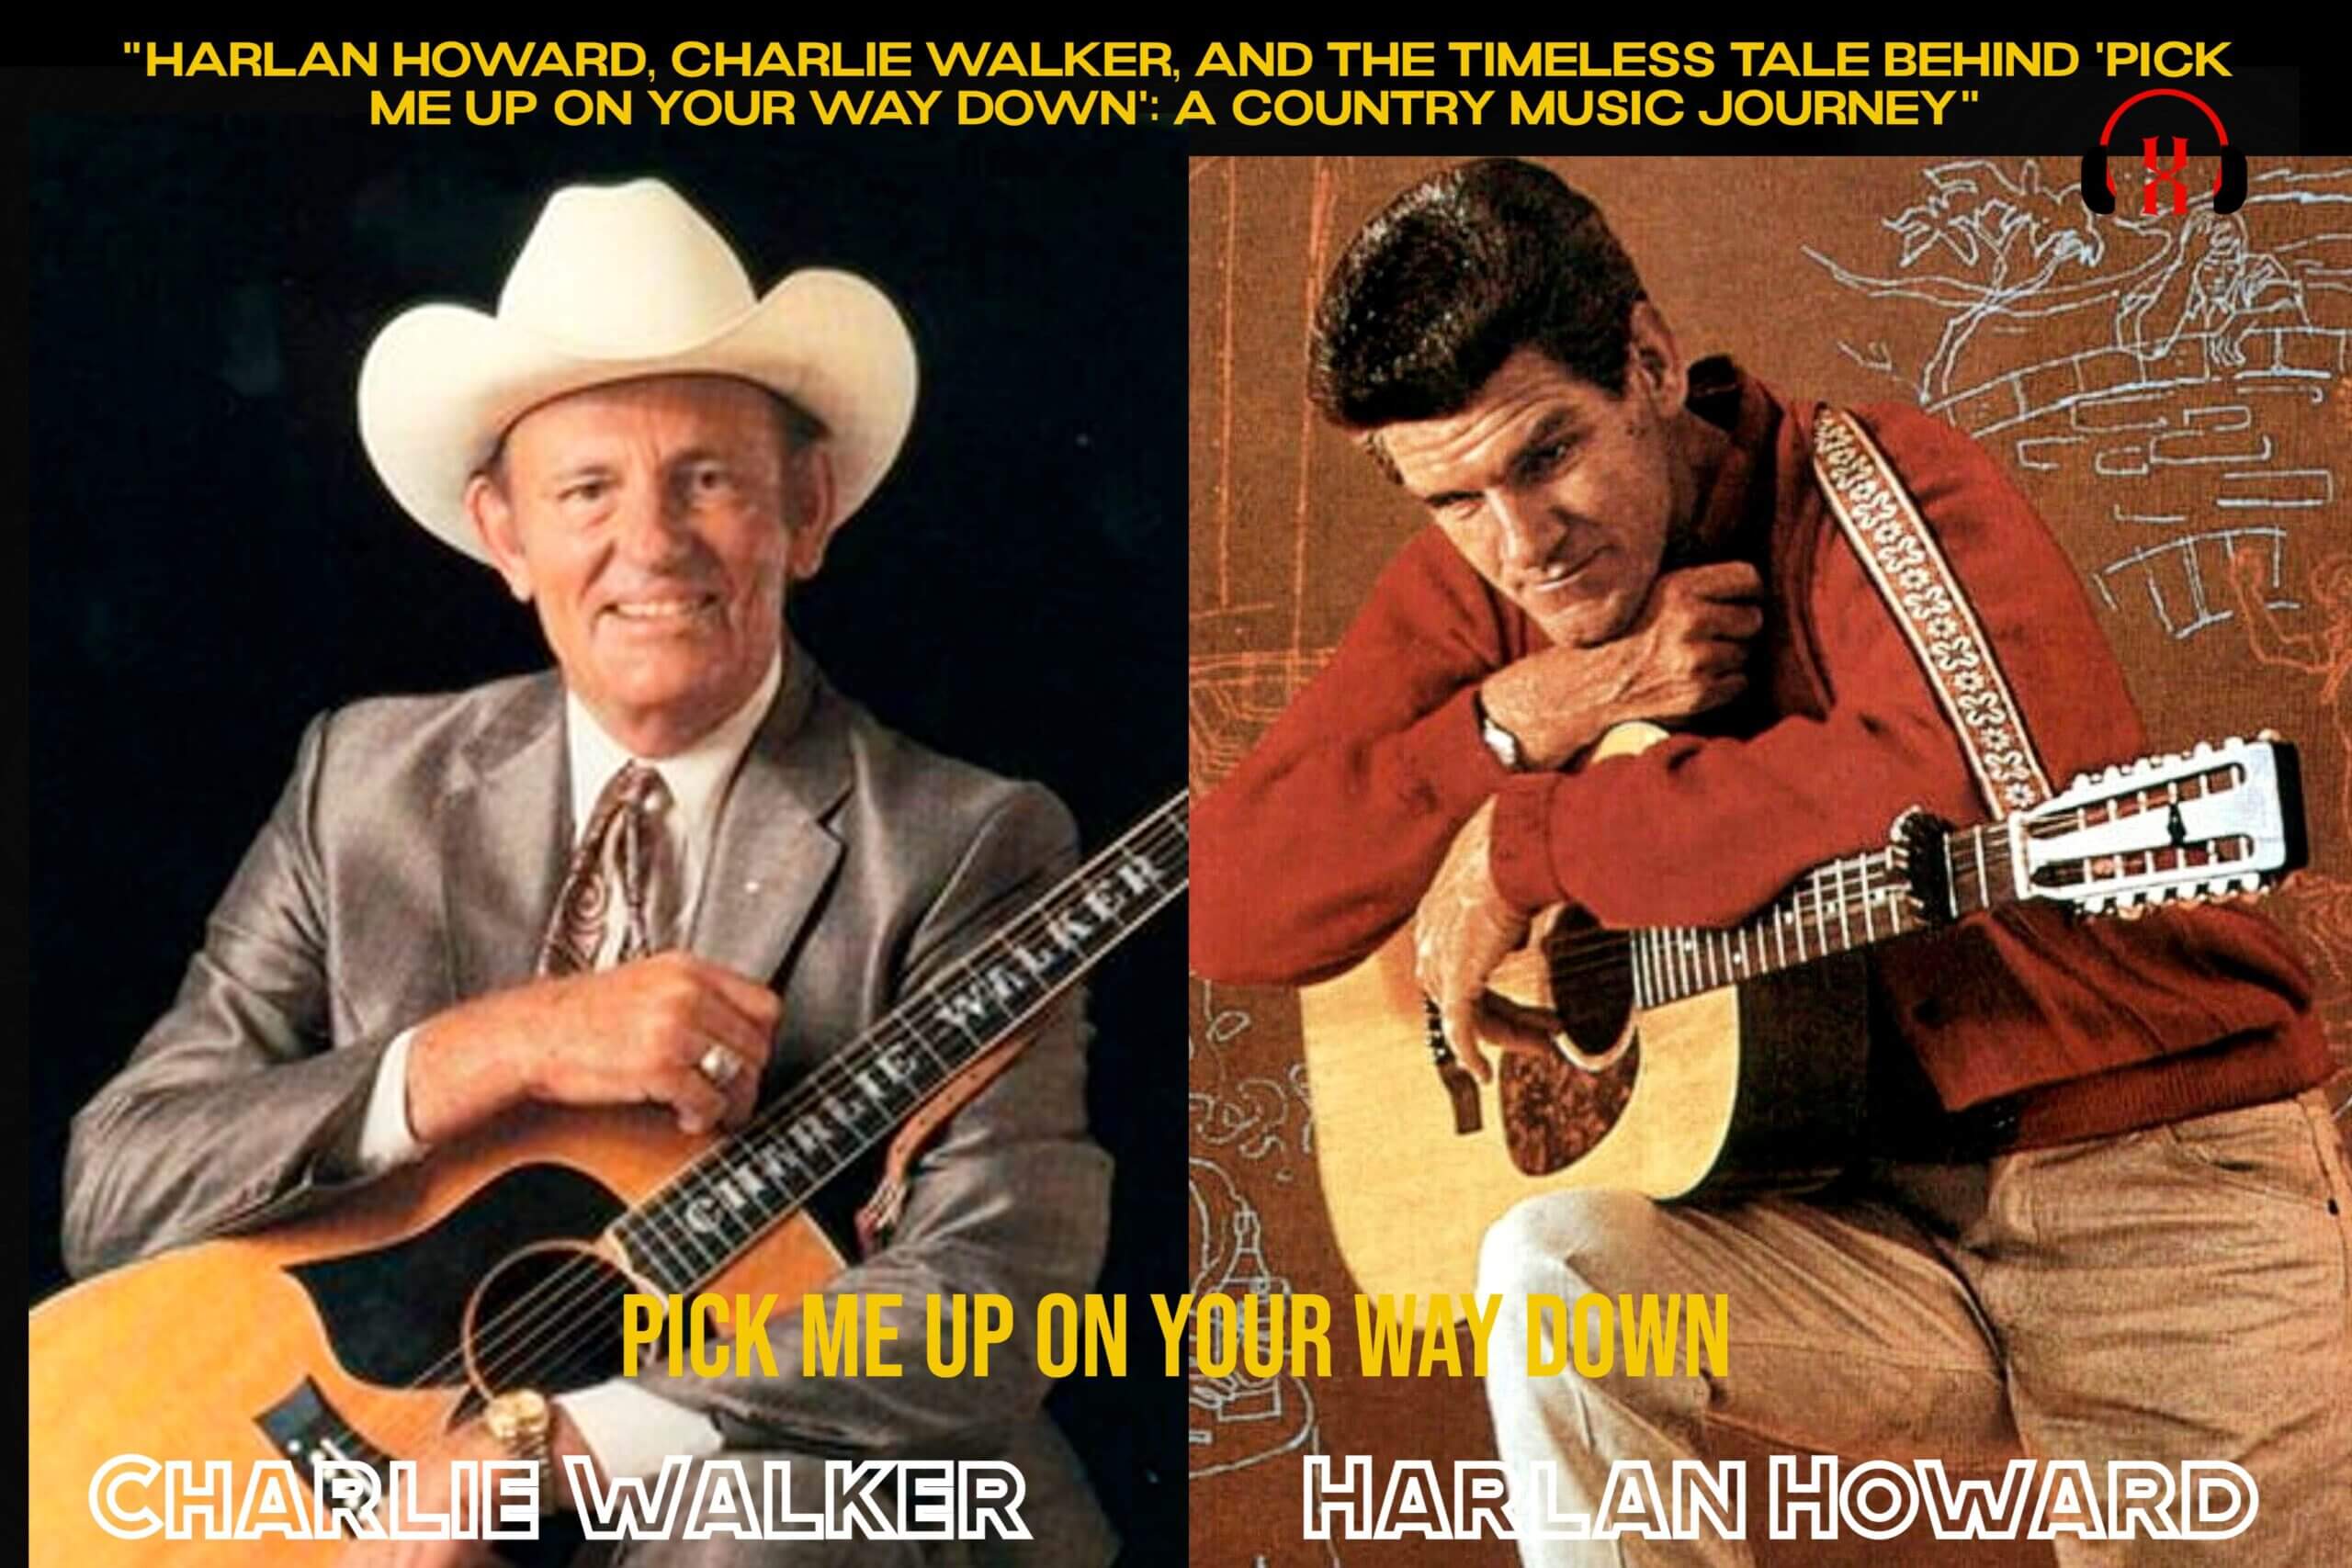 “Harlan Howard, Charlie Walker, and the Timeless Tale Behind ‘Pick Me Up On Your Way Down’: A Country Music Journey”